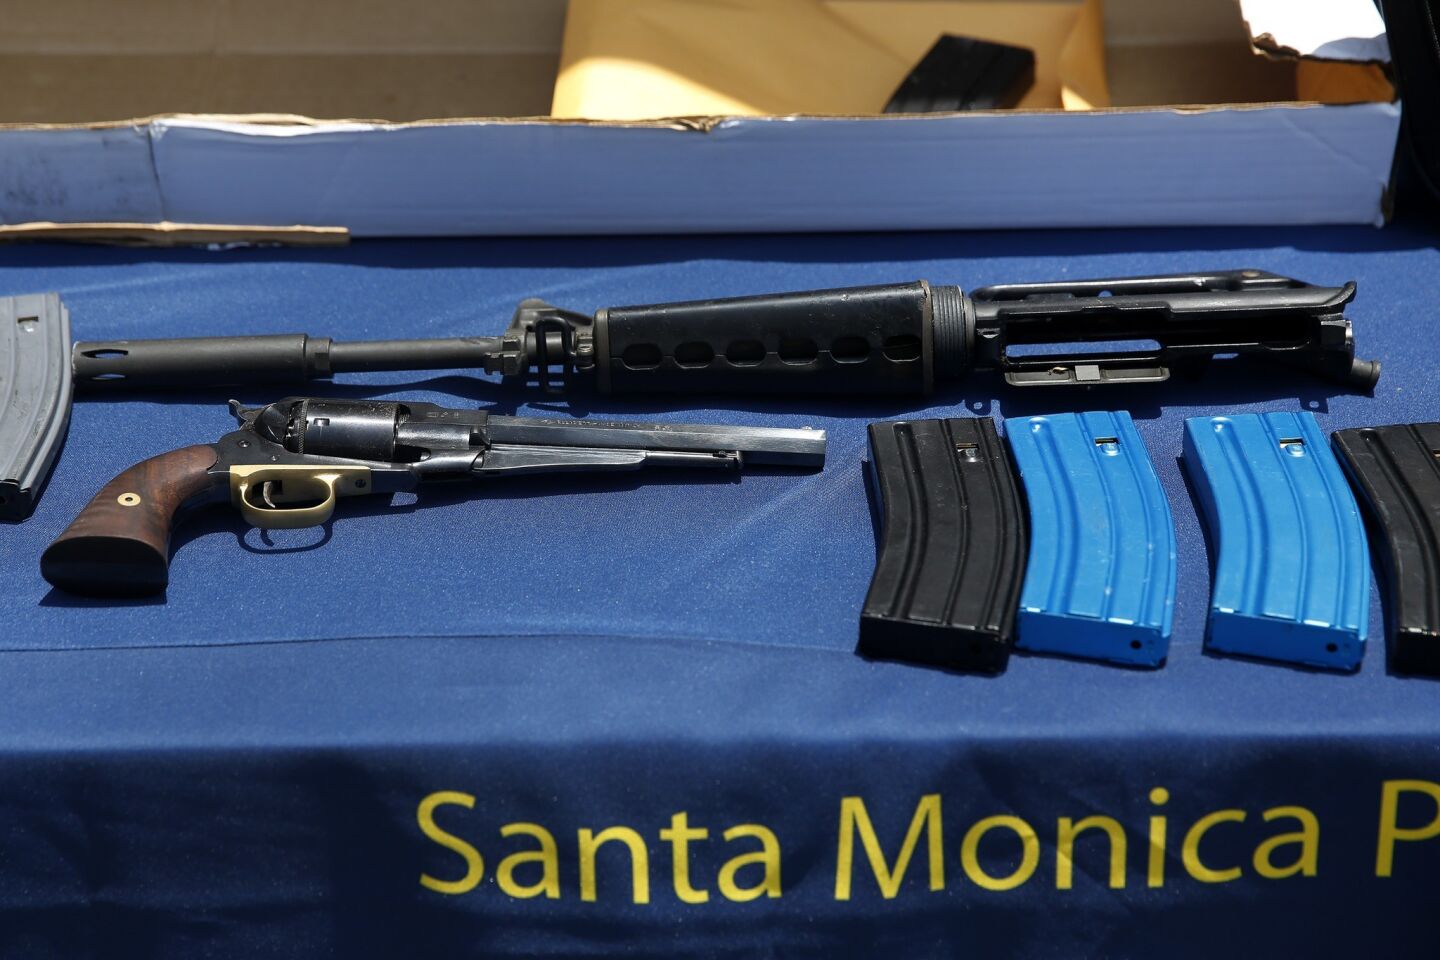 Police display a .44-caliber handgun and parts of an AR-15 style, .223-caliber, semiautomatic rifle, along with multiple clips and boxes of ammunition and knee pads that belonged to the gunman, identified as John Zawahri.